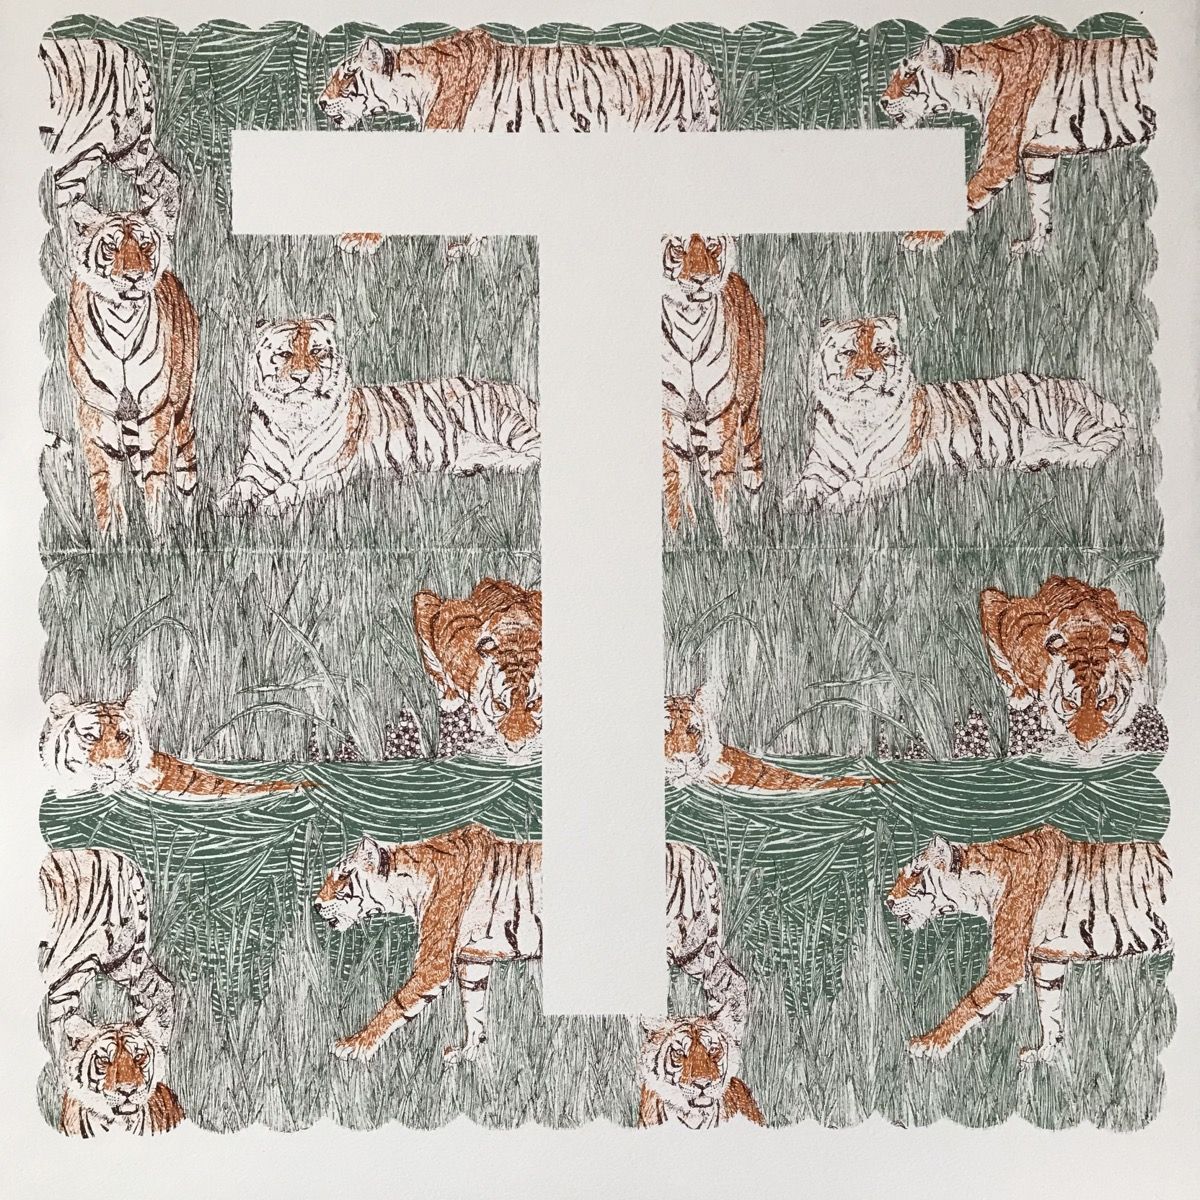 T is for Tiger (large) by Clare Halifax